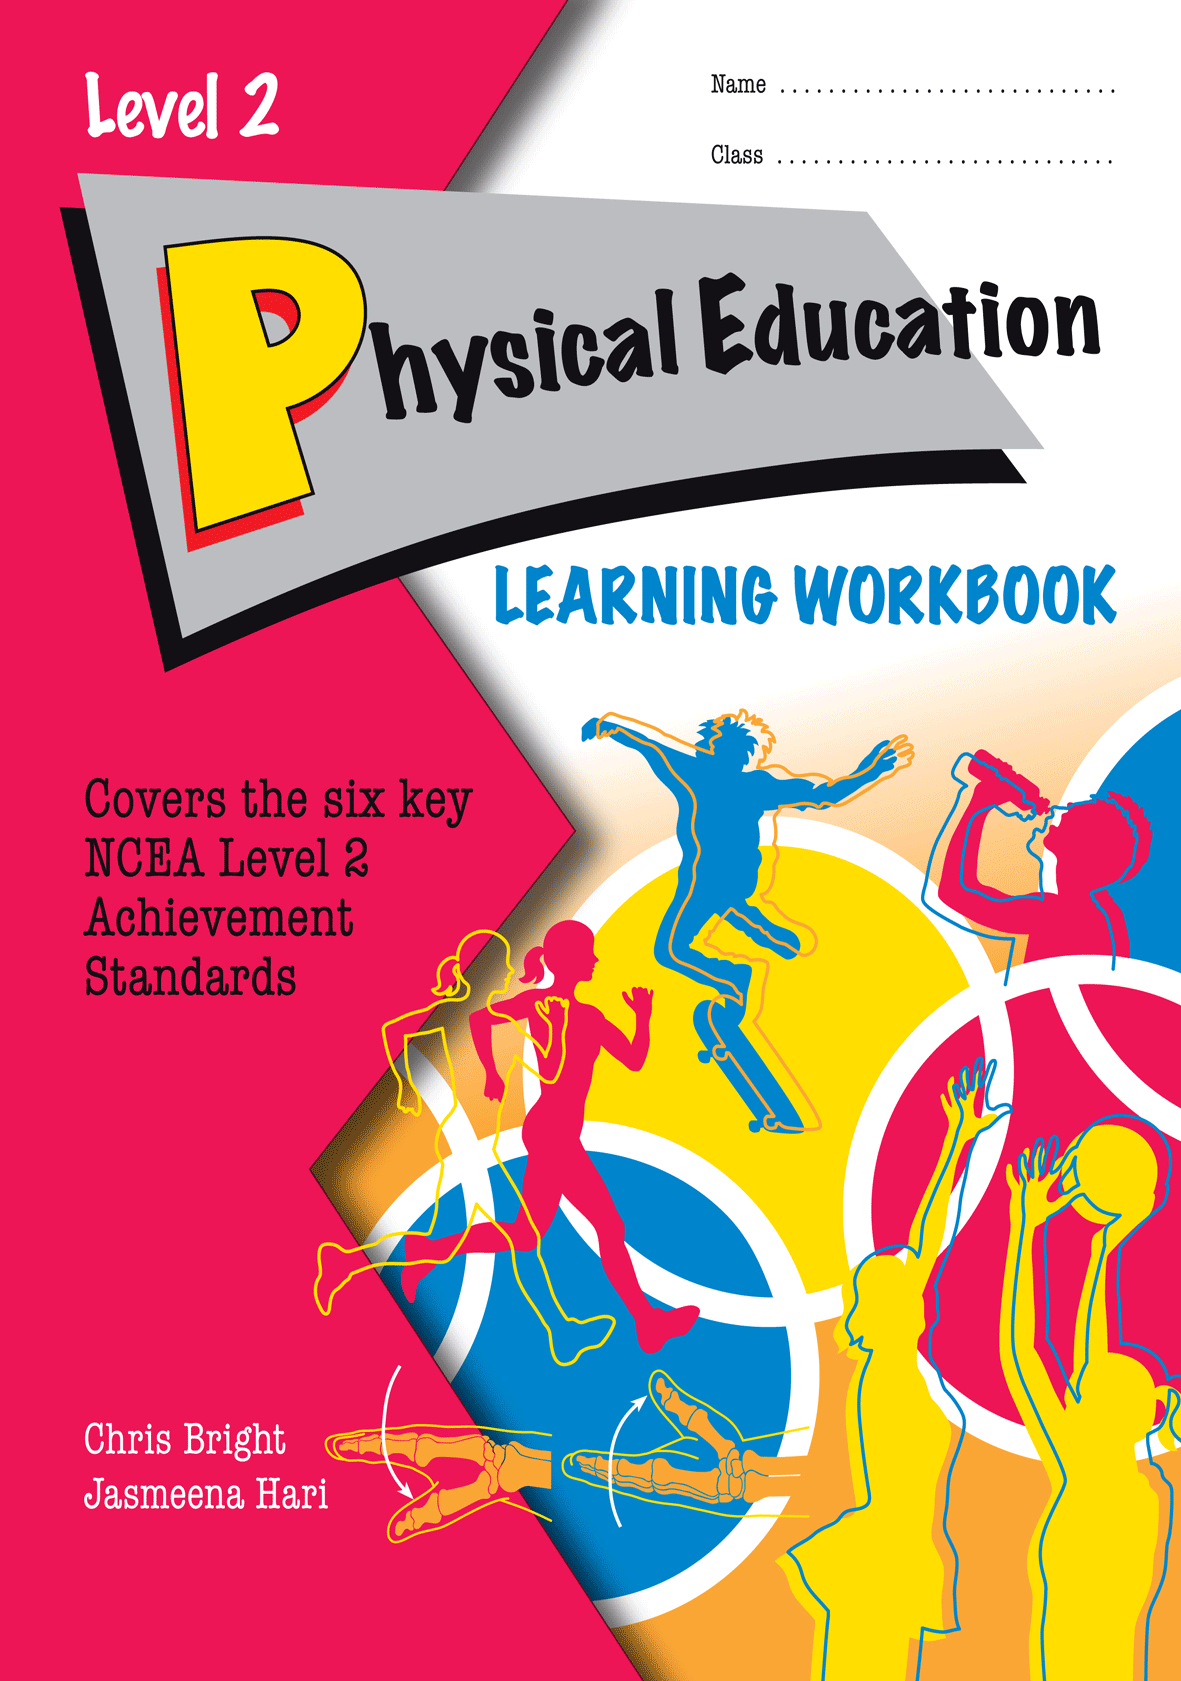 Level 2 Physical Education Learning Workbook - SPECIAL (damaged stock at $10 each)